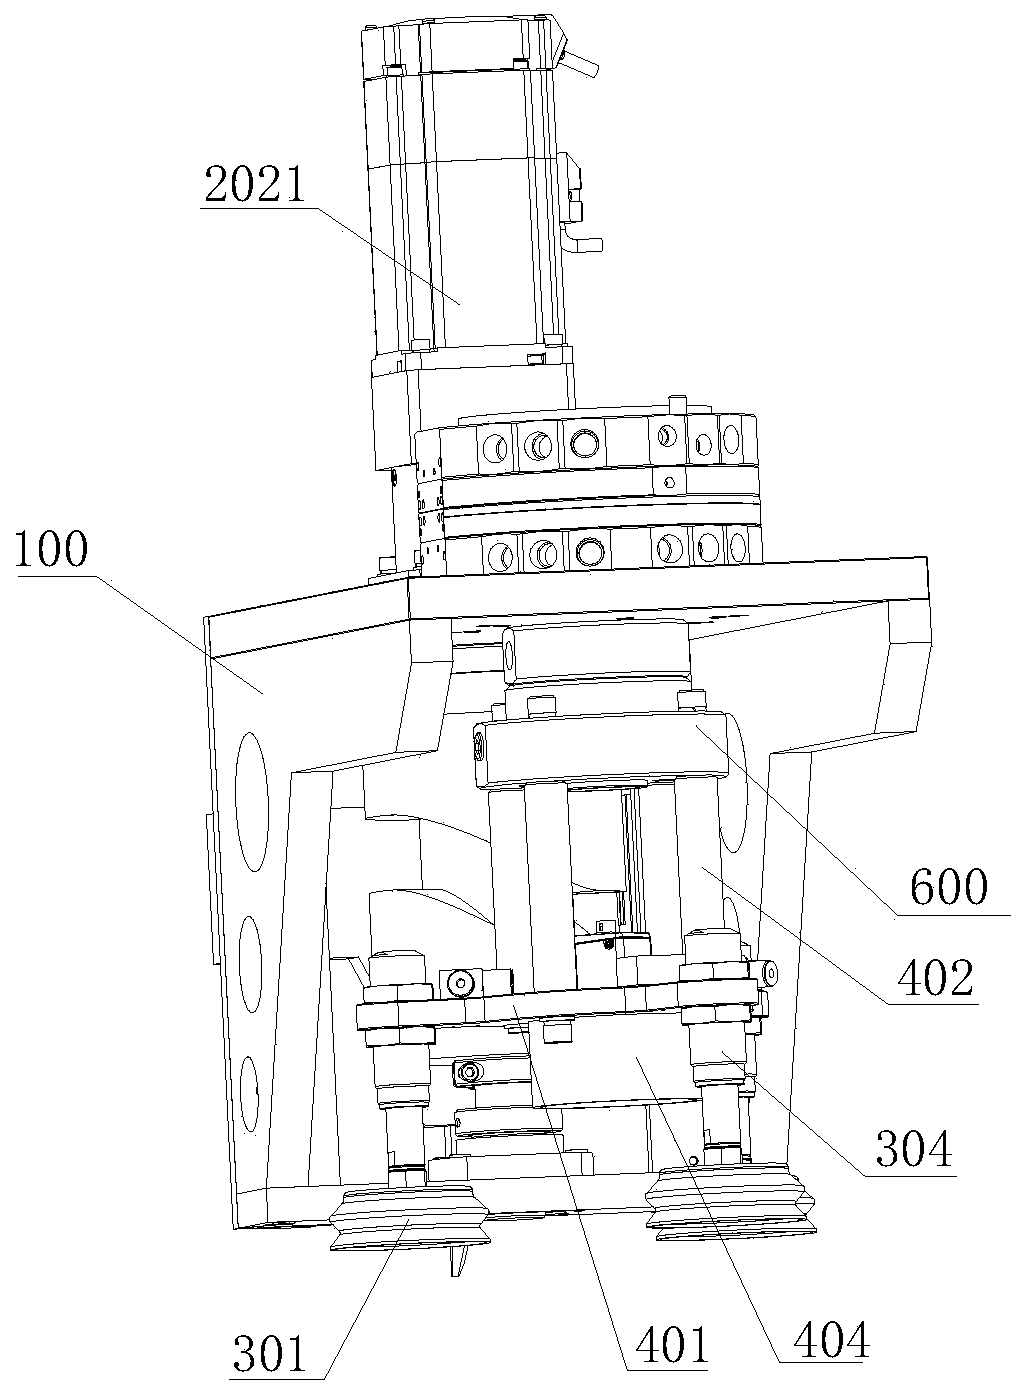 Bucket cover opening and taking device suitable for factory automation